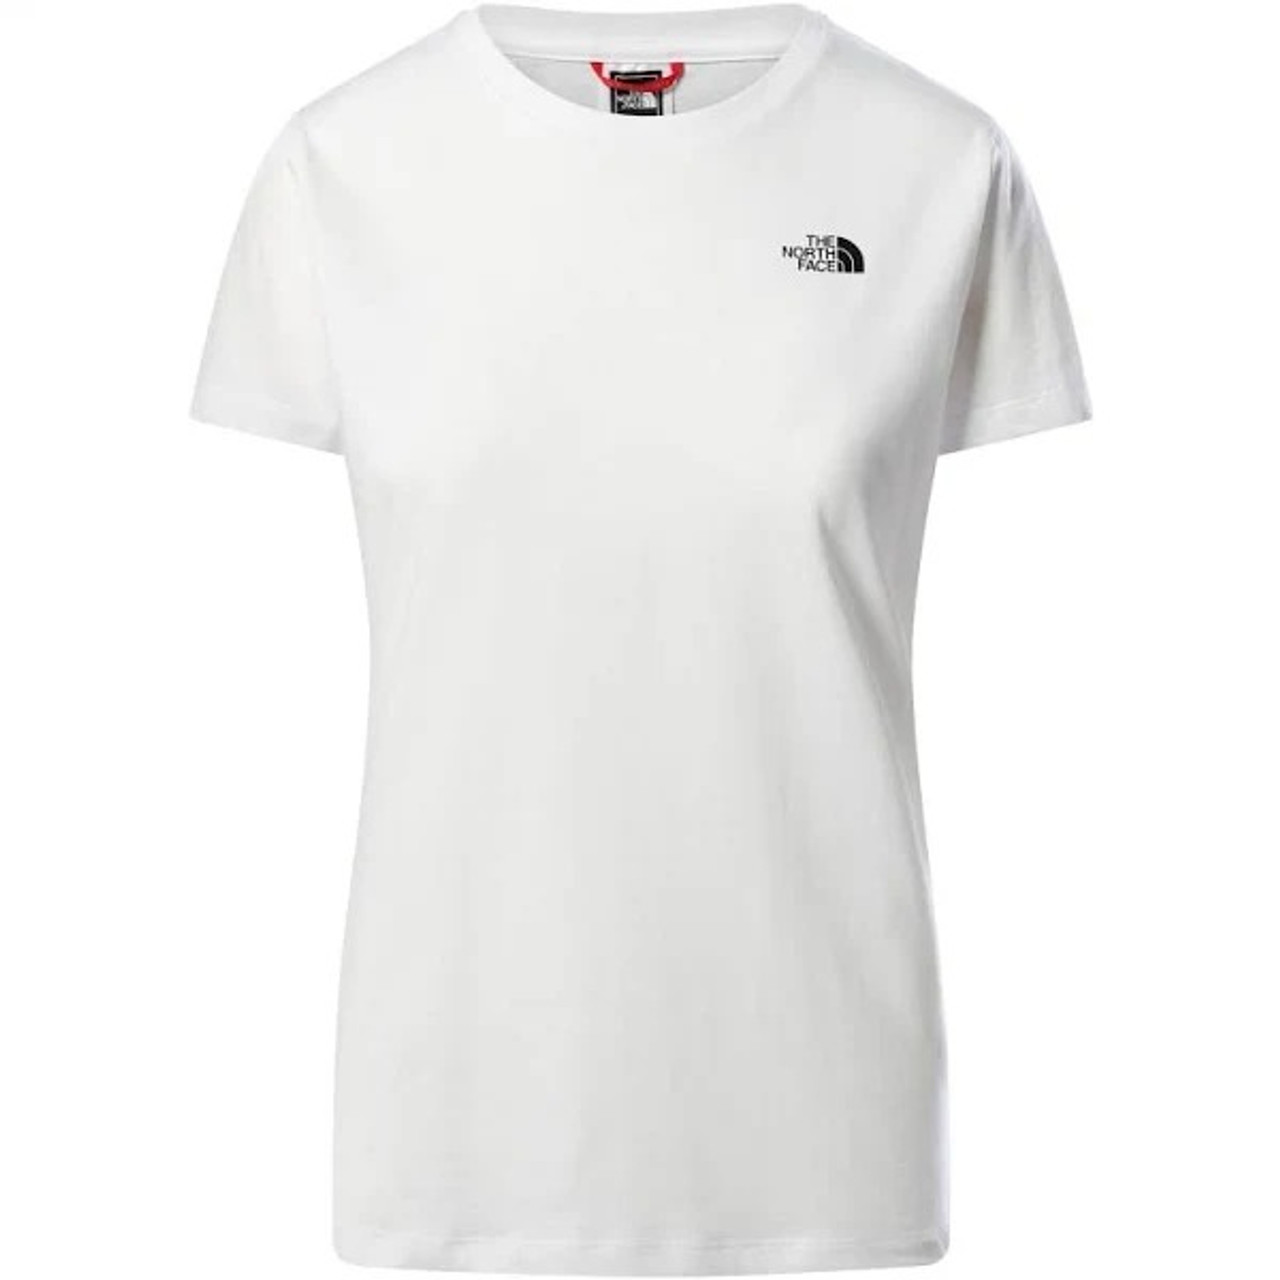 T-shirt White North Face with Logo BEYOND BTR Sleeve Short Chest in - - The THE RACK